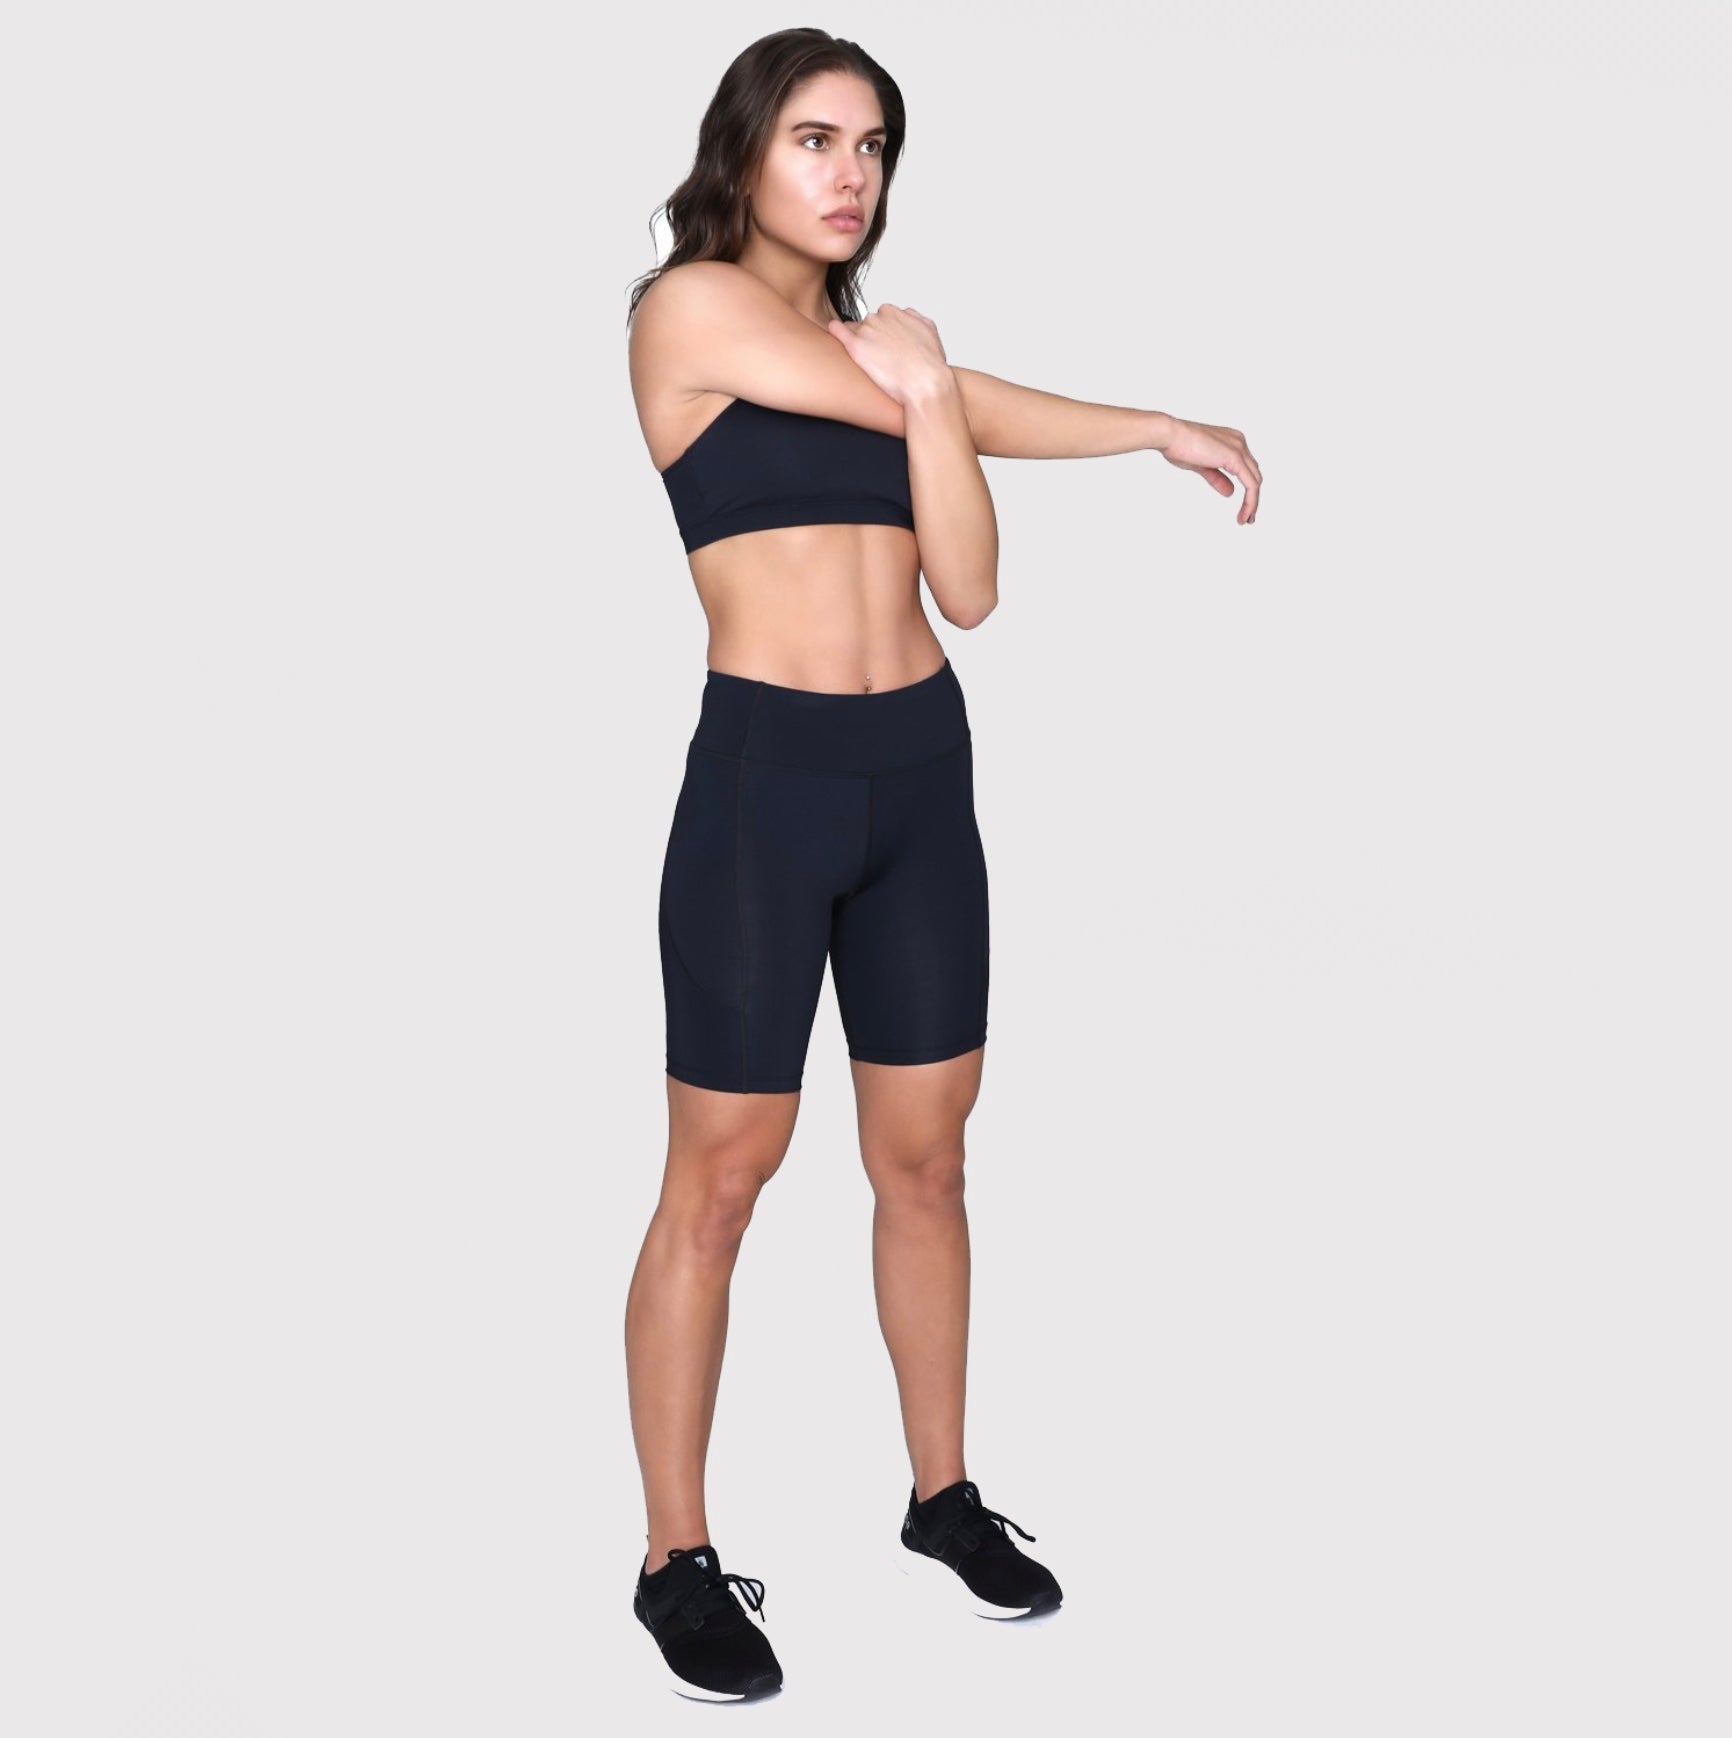 Womens Compression Shorts - Compression Tights & Shorts for Women -  Compression Tights & Shorts - Athletic Compression - Athletic, Recovery -  OrthoMed Canada